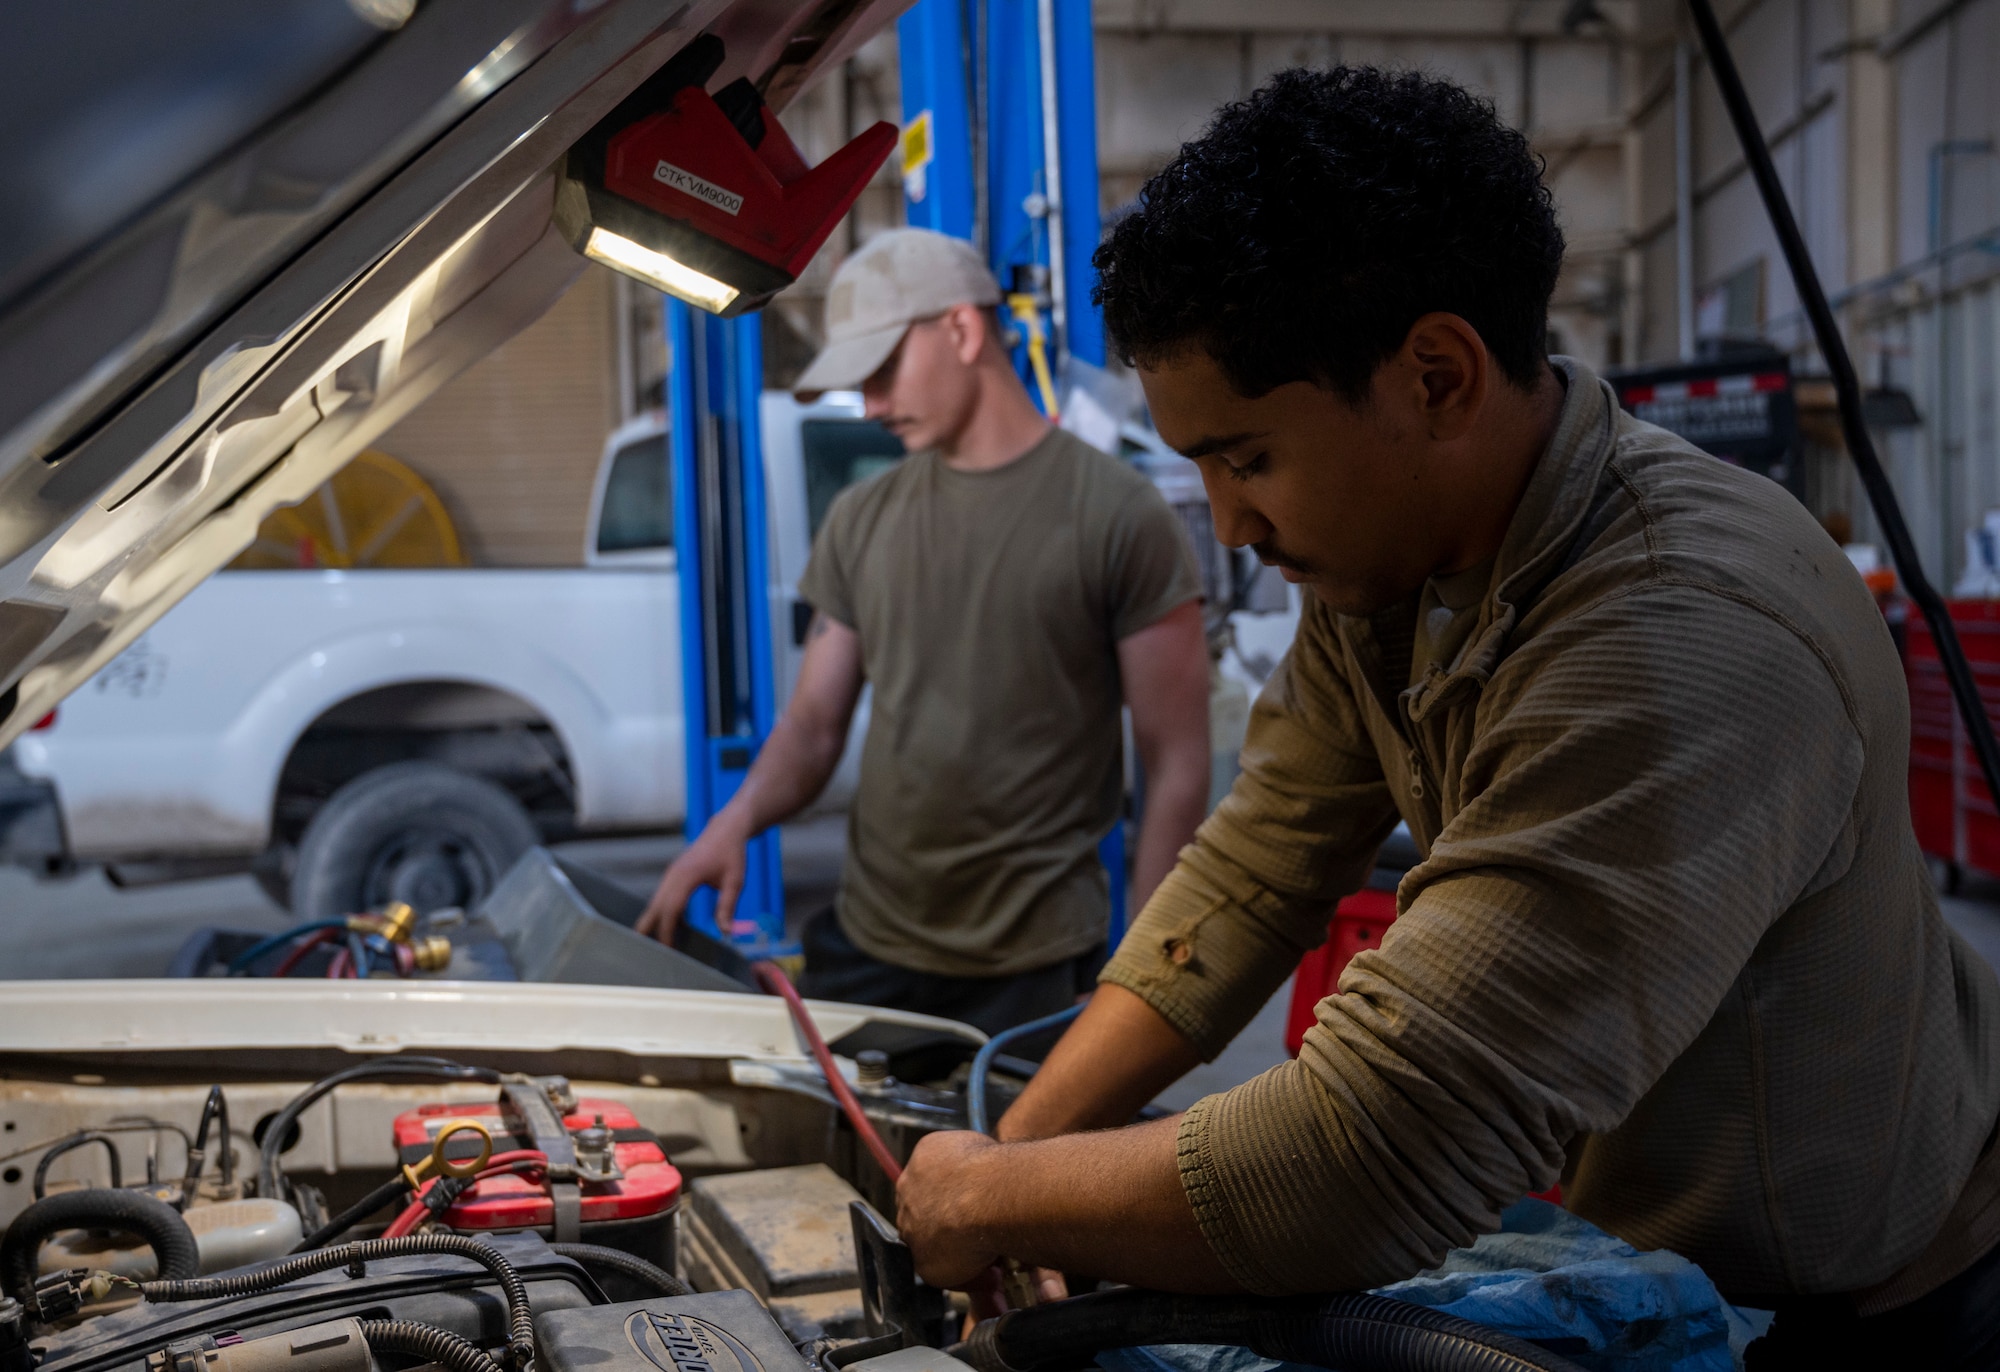 U.S. Air Force Airman 1st Class Gabriel Evans, a 386th Expeditionary Logistics Readiness Squadron vehicle management specialist, works on a truck at Ali Al Salem Air Base, Kuwait, March 8, 2023.